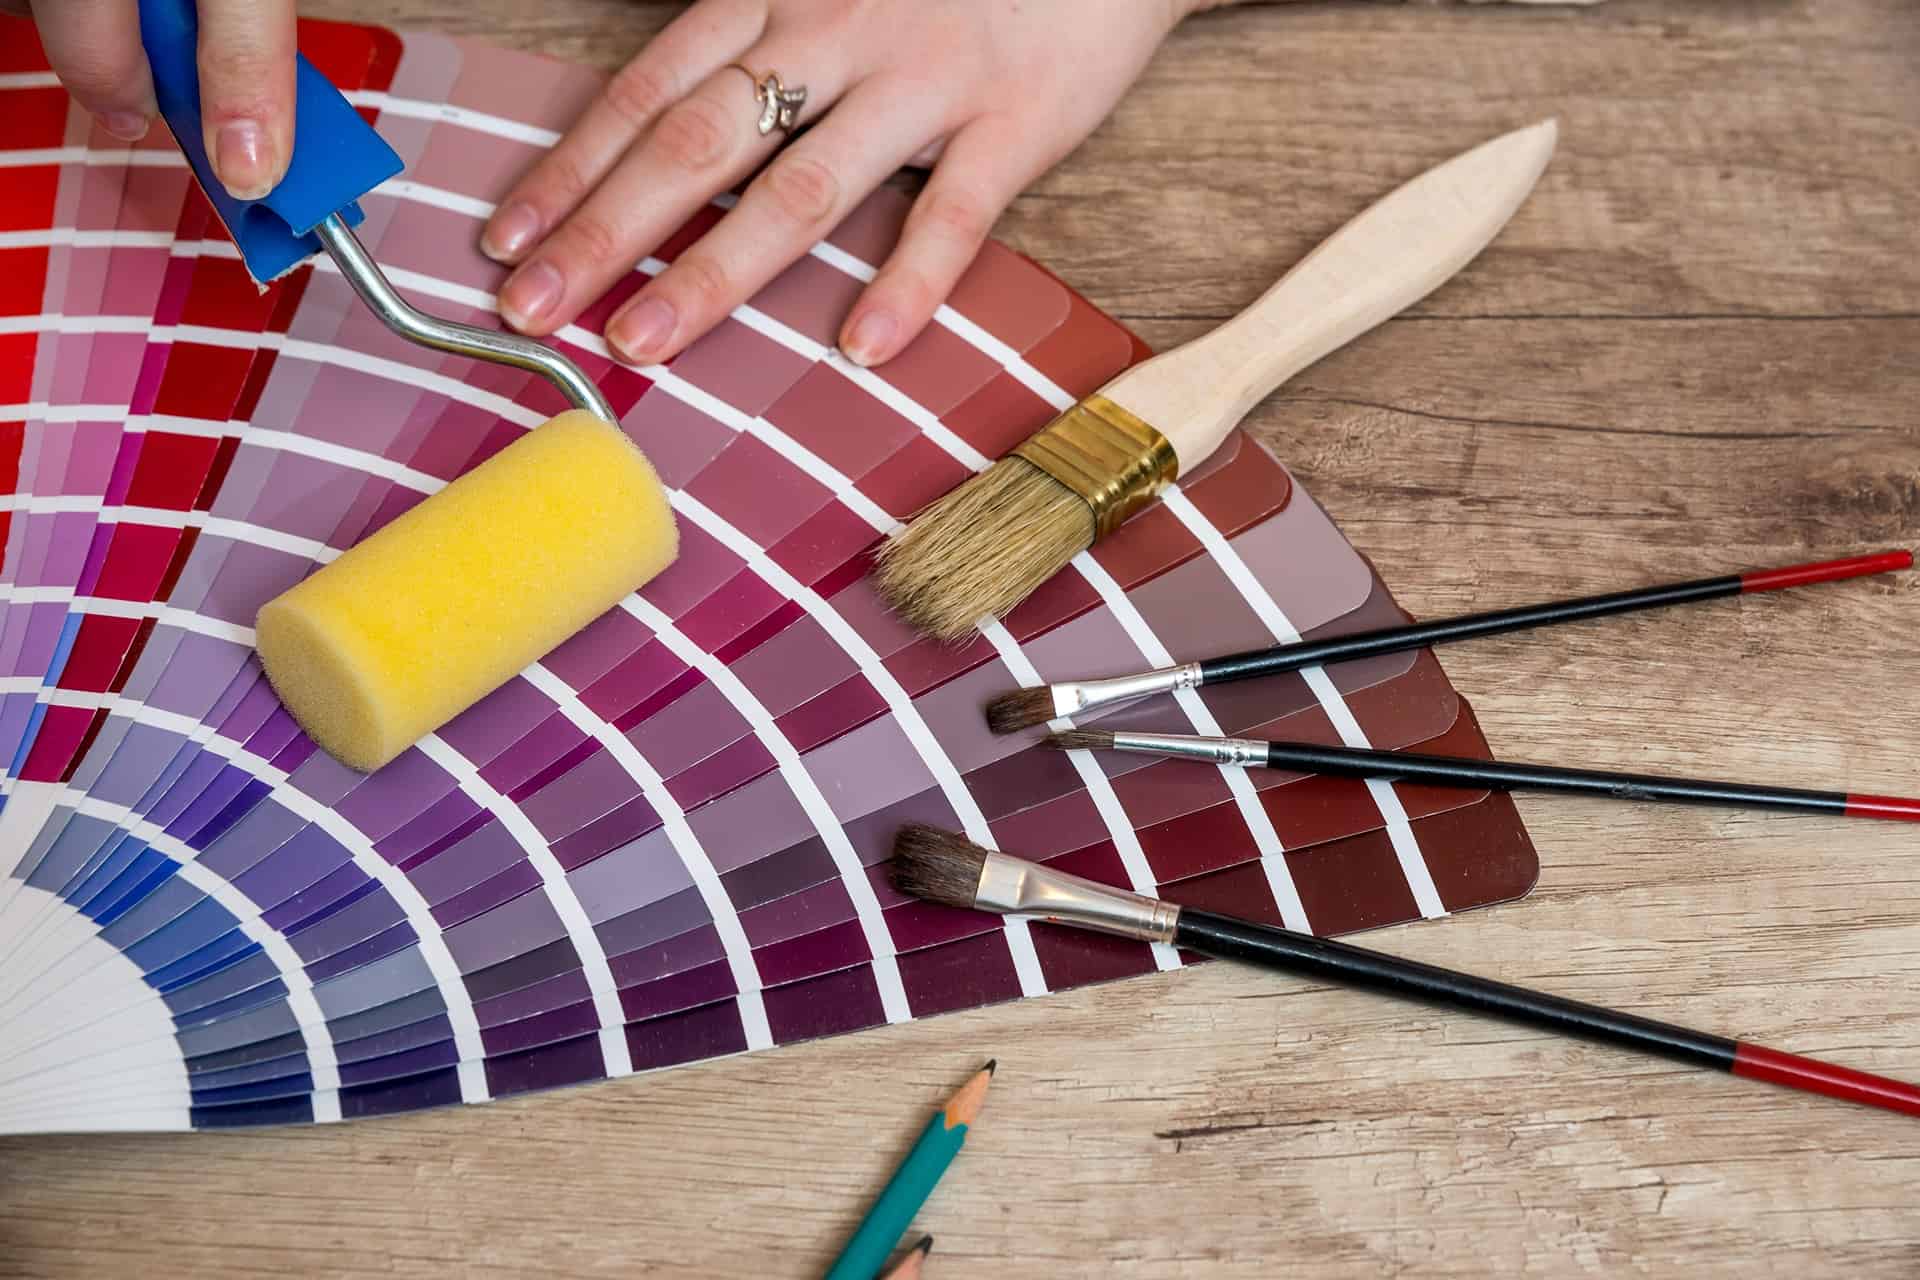 An array of paint swatches, brushes, and rollers laid out on a table